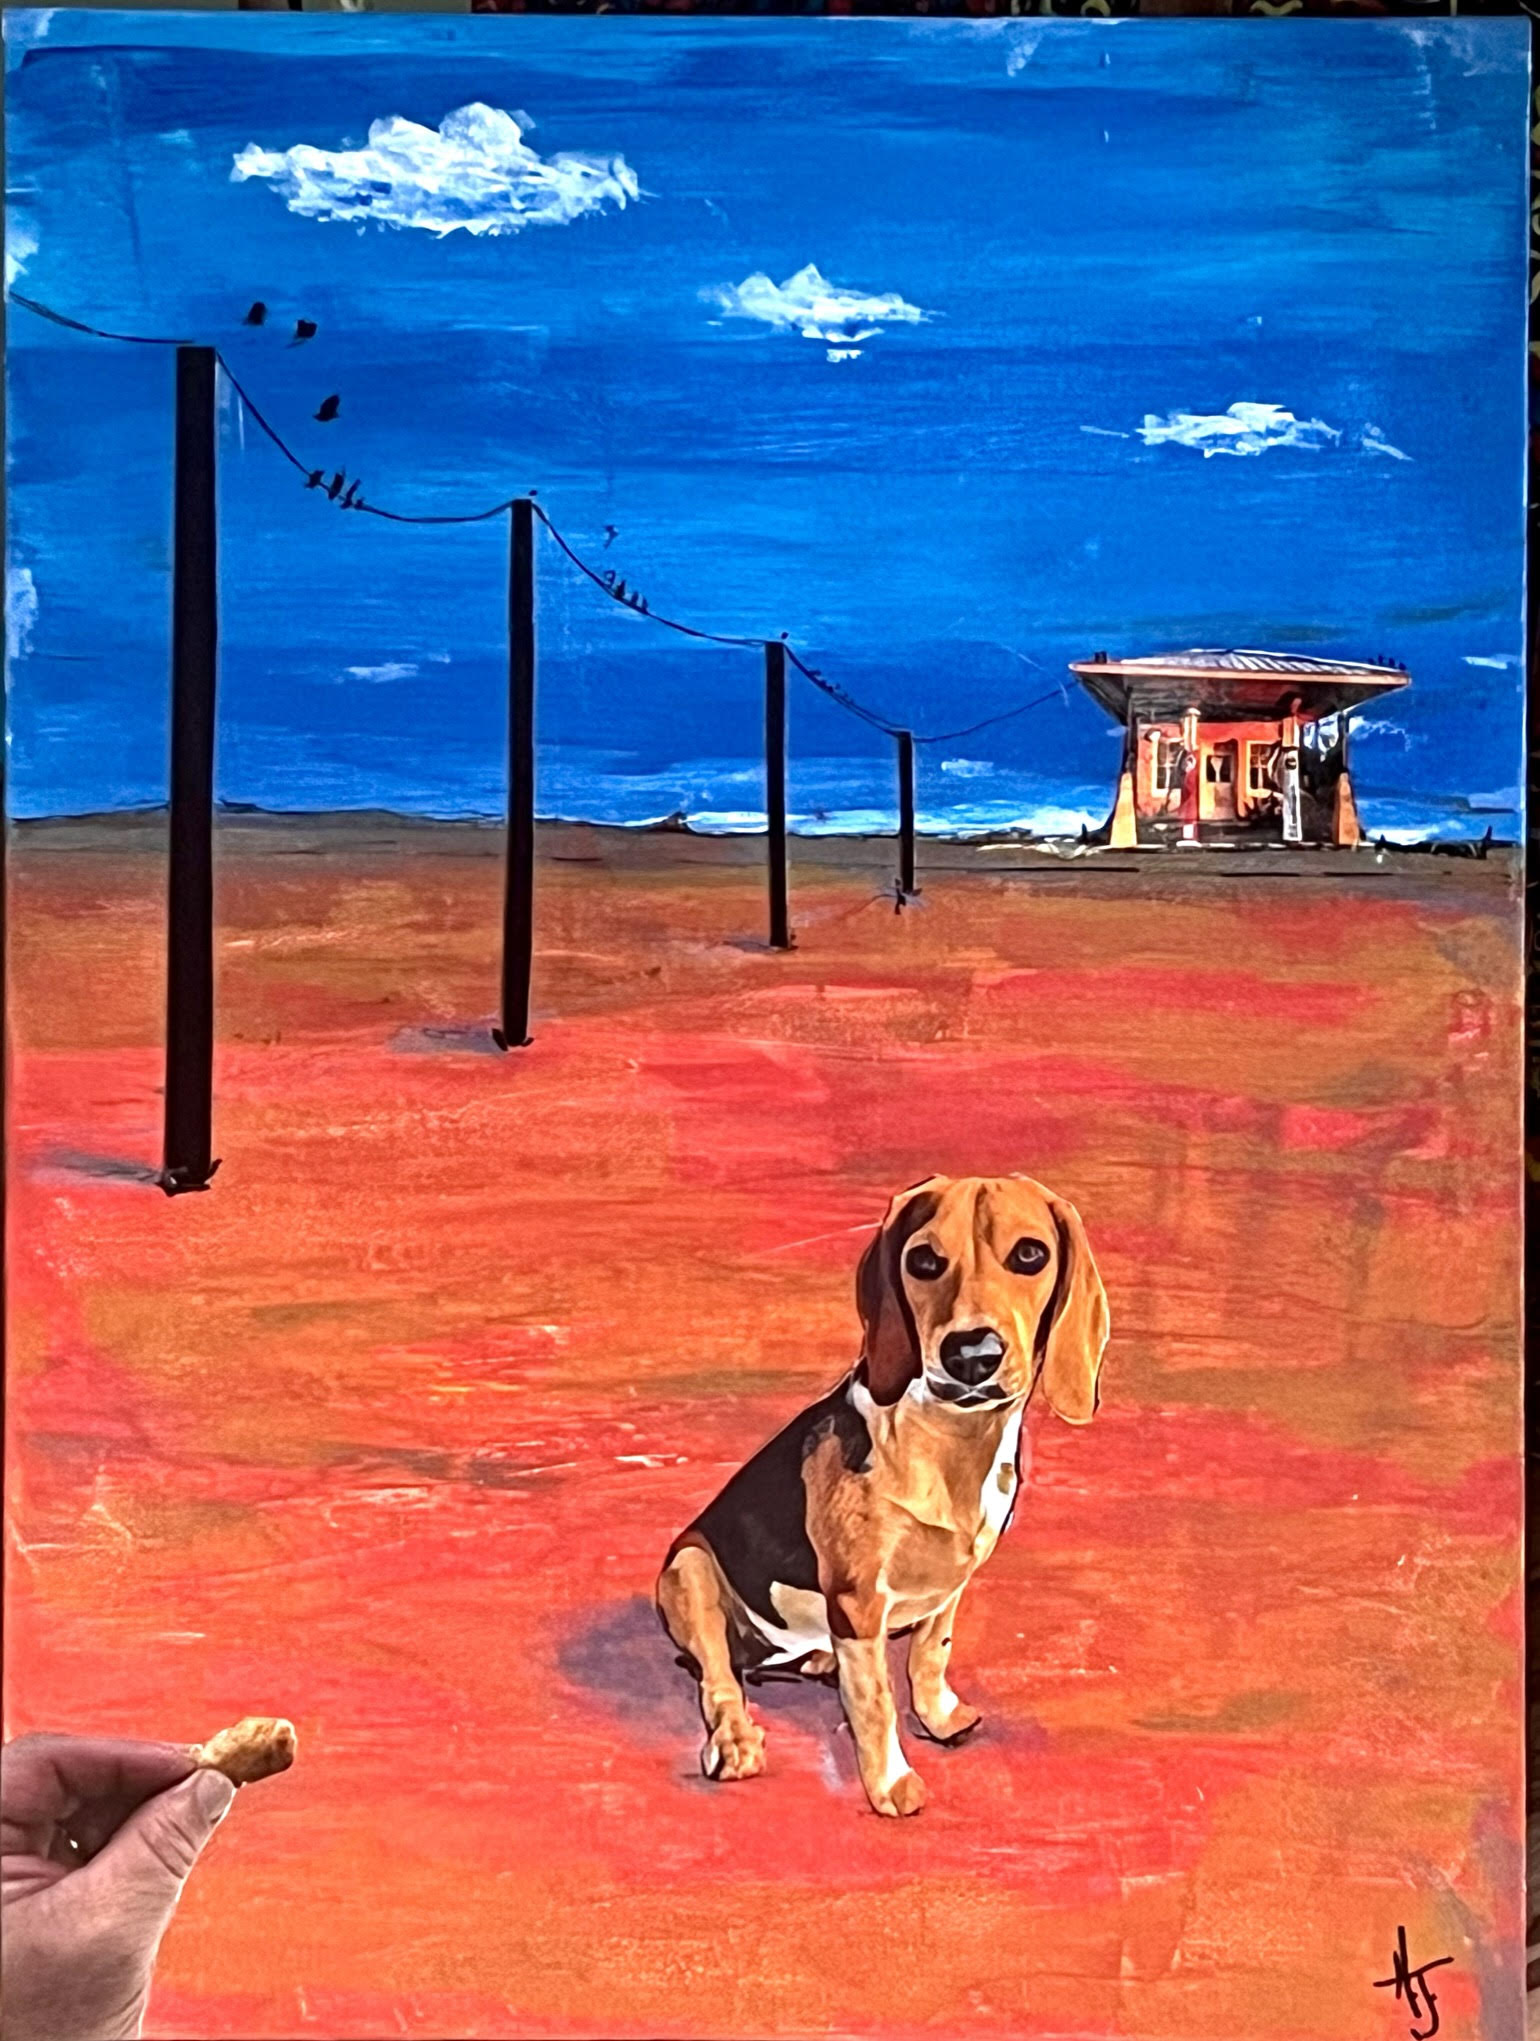 A painting of a dog sitting near a row of utility poles